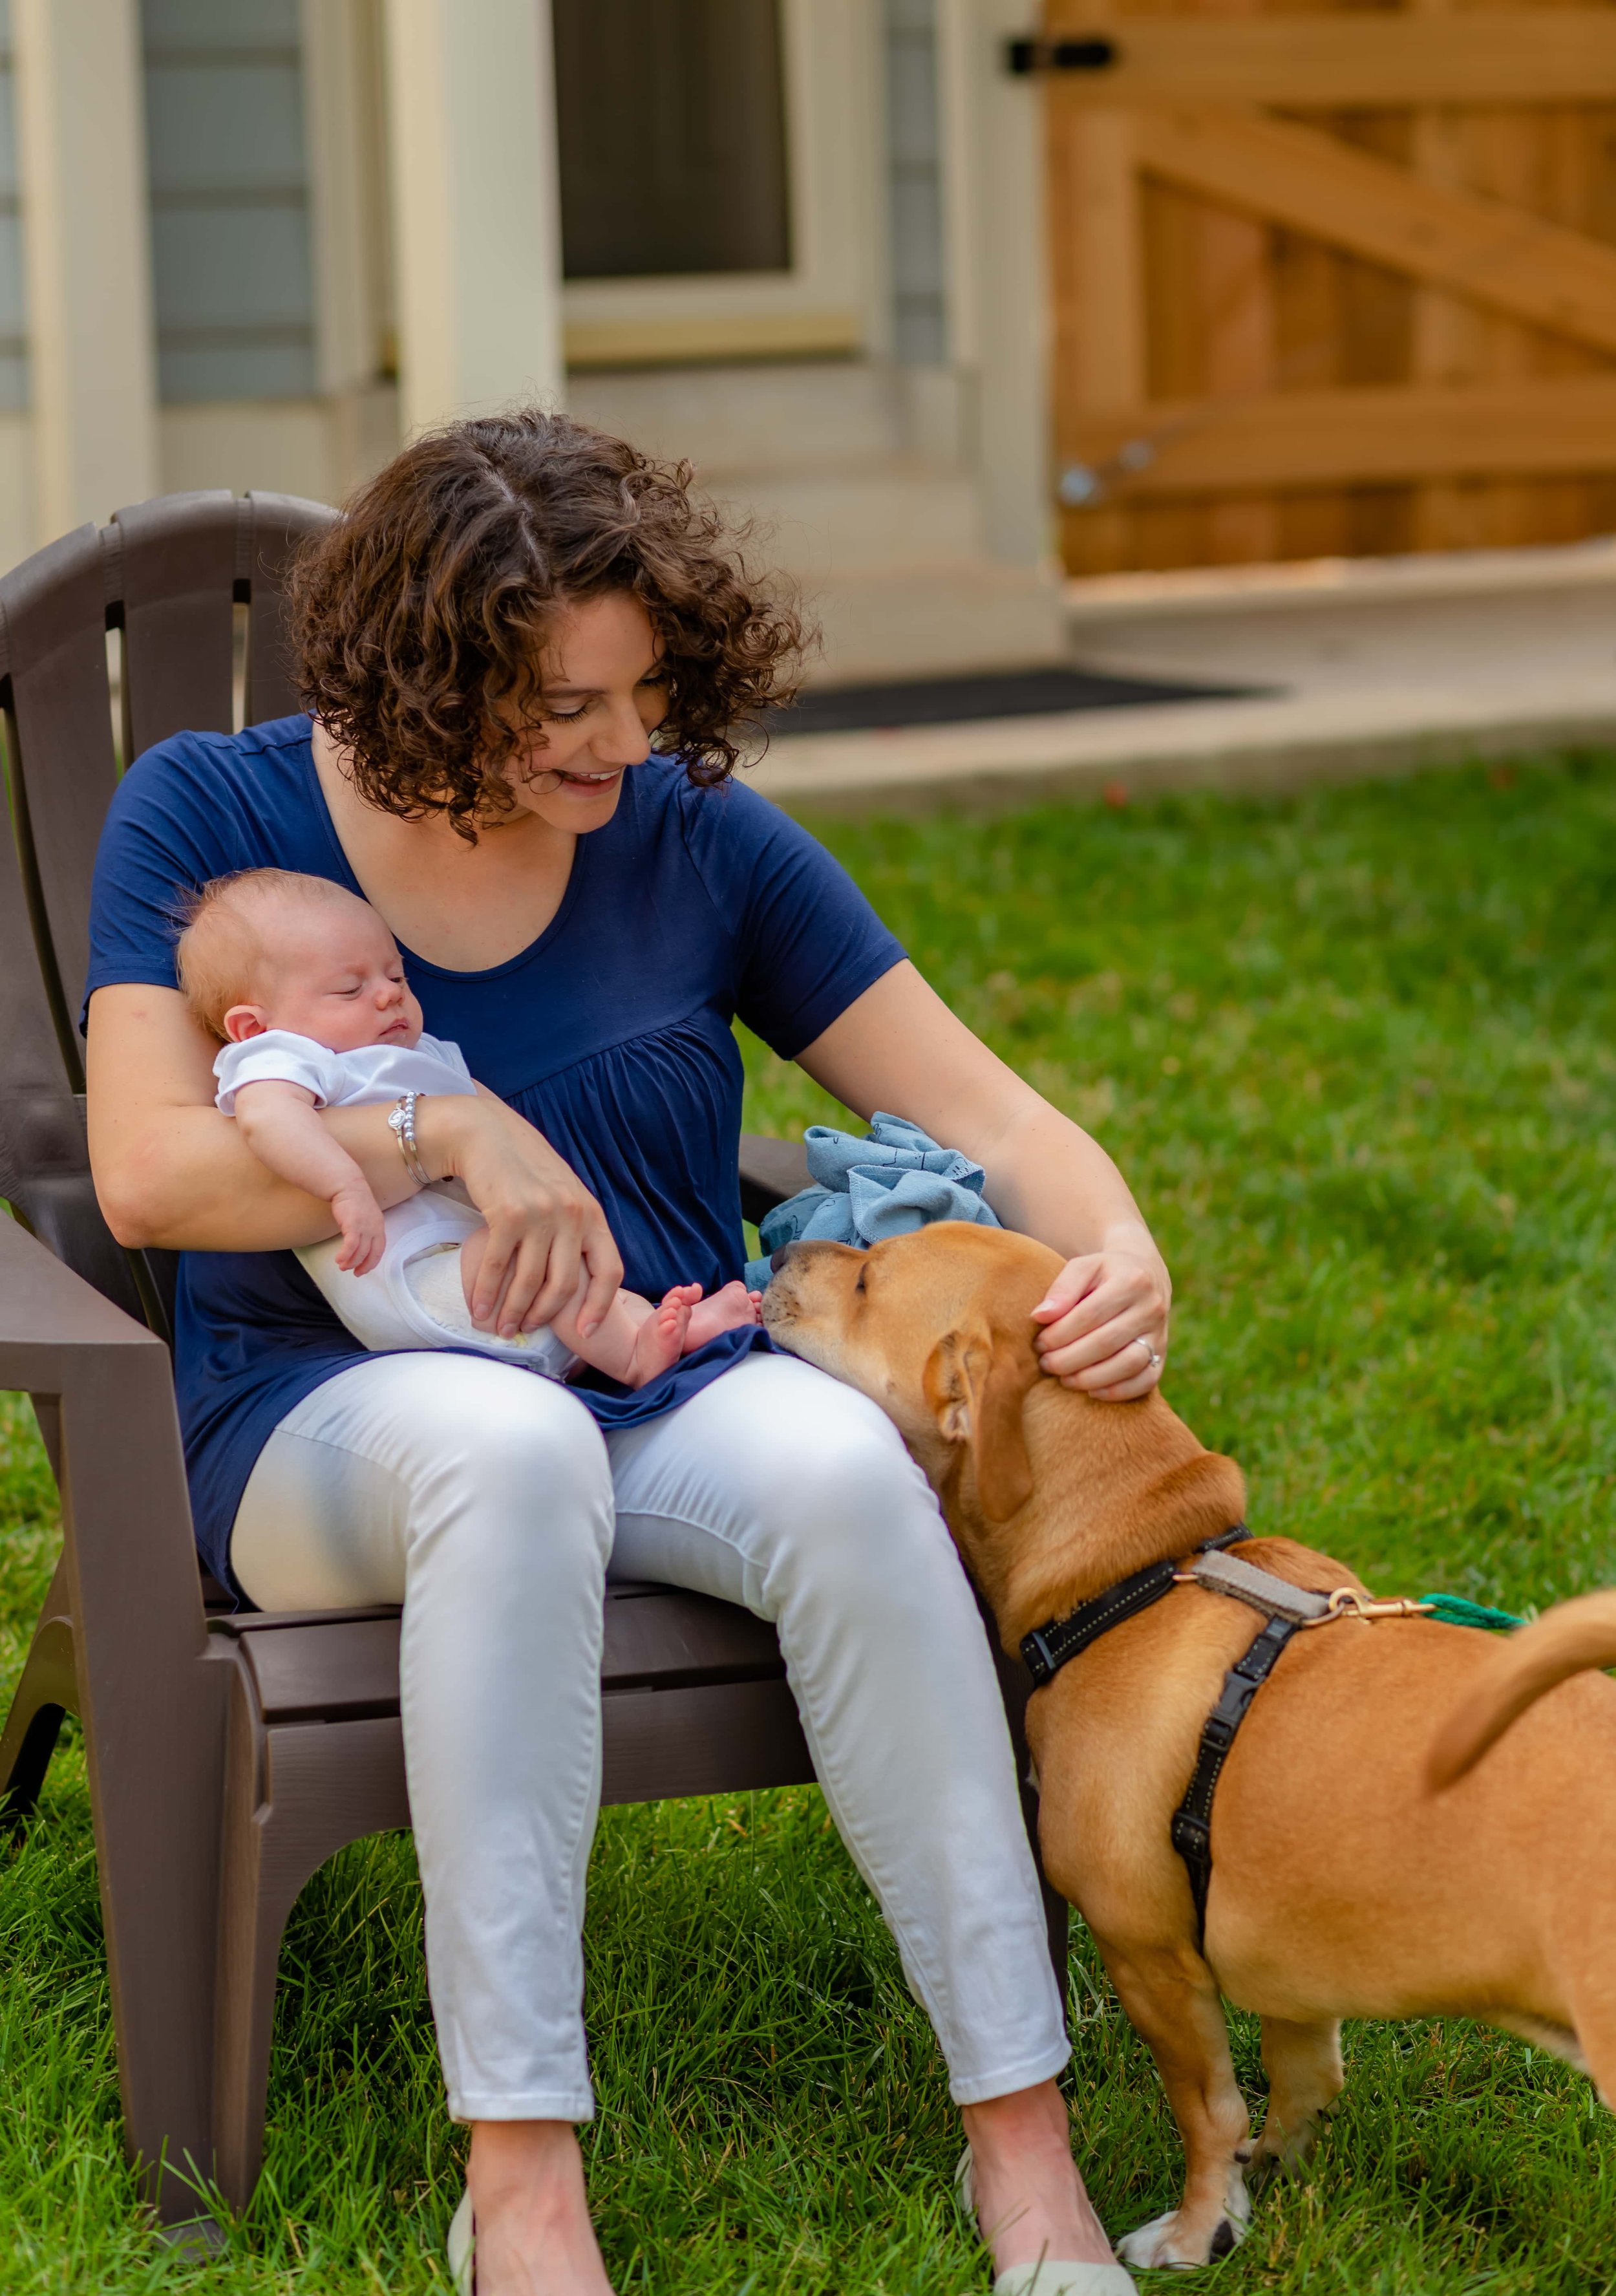 Maryland Newborn Photoshoot with mom, baby and puppy